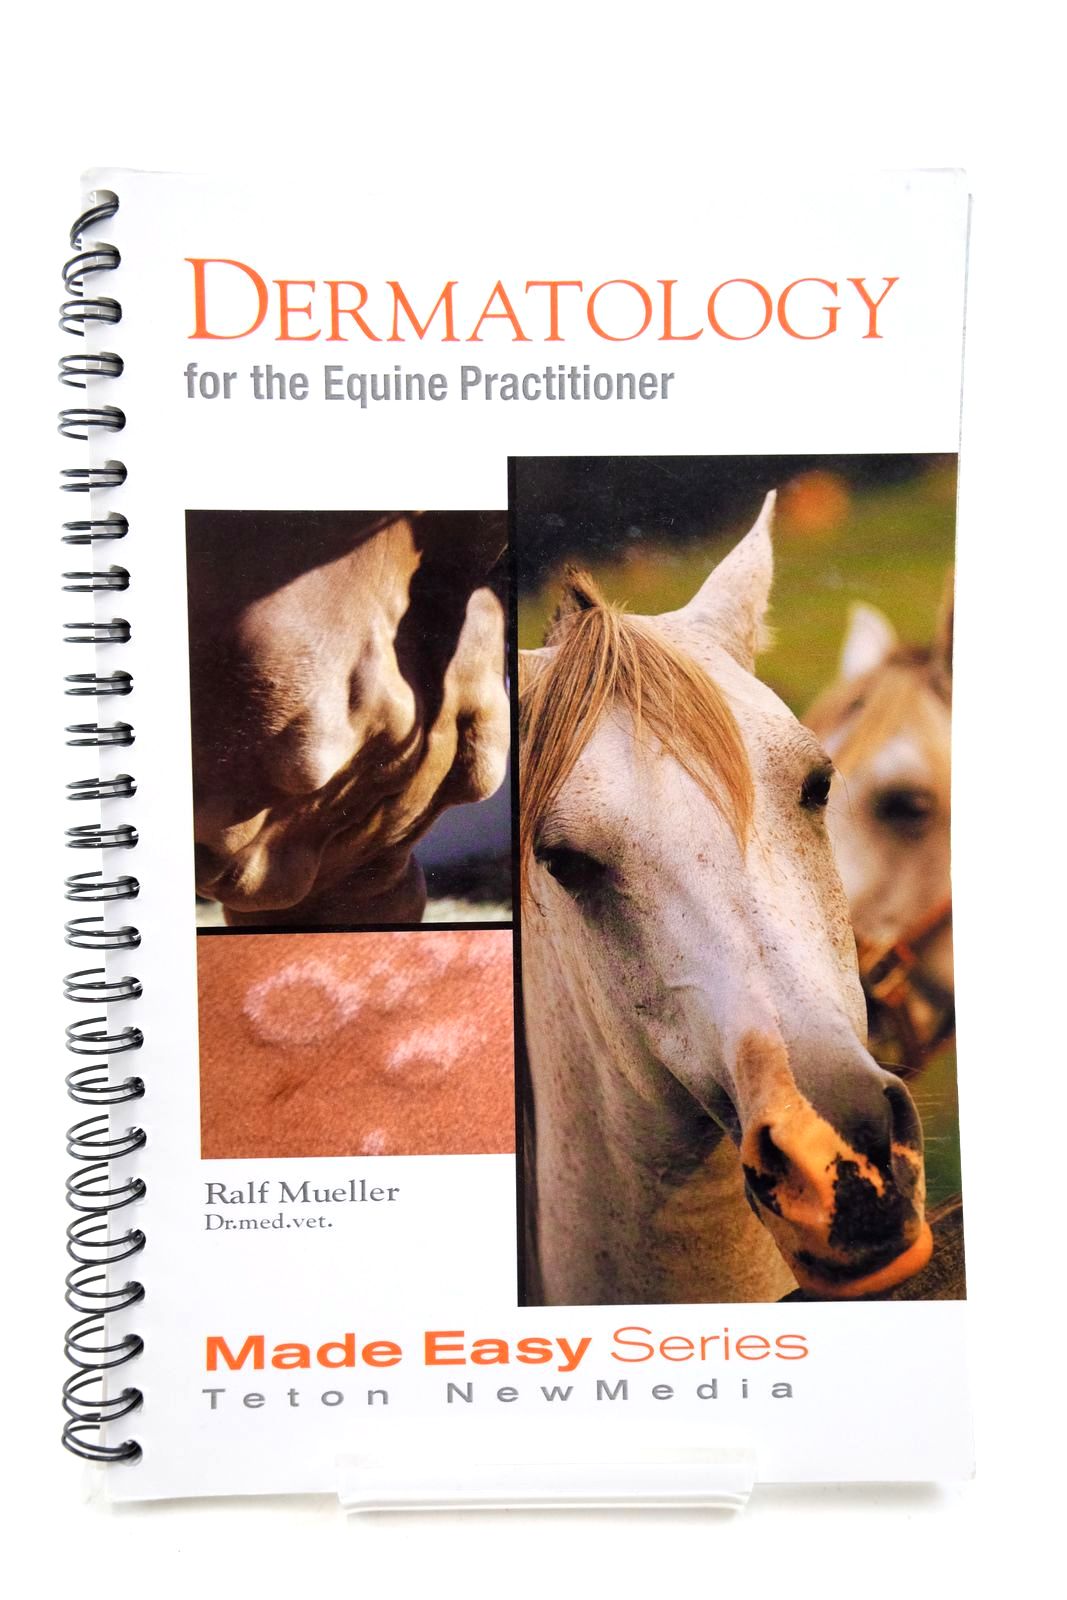 Photo of DERMATOLOGY FOR THE EQUINE PRACTITIONER written by Mueller, Ralf S. published by Teton Newmedia (STOCK CODE: 2140399)  for sale by Stella & Rose's Books